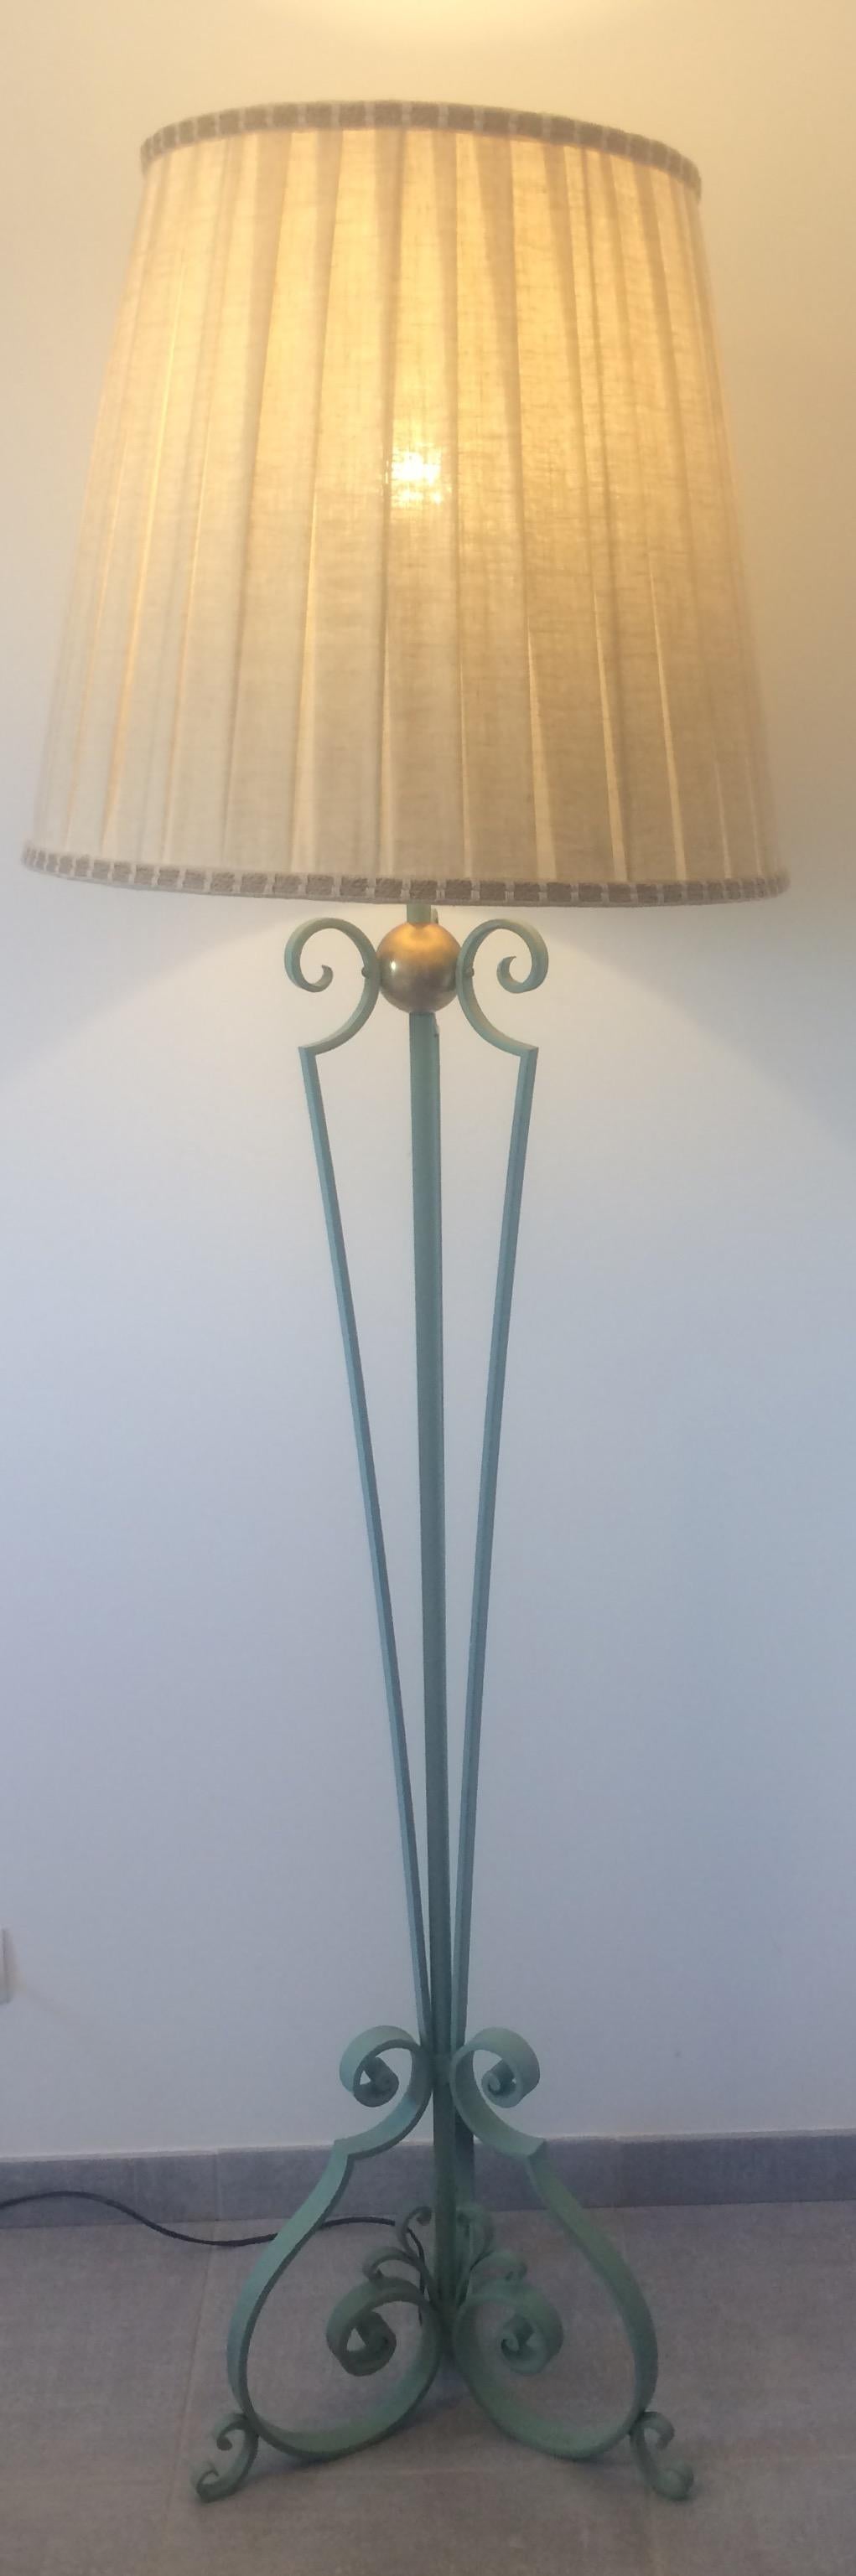 Mid-20th Century French Wrought Iron Floor Lamp in the style of Gilbert Pollierat, circa 1950s